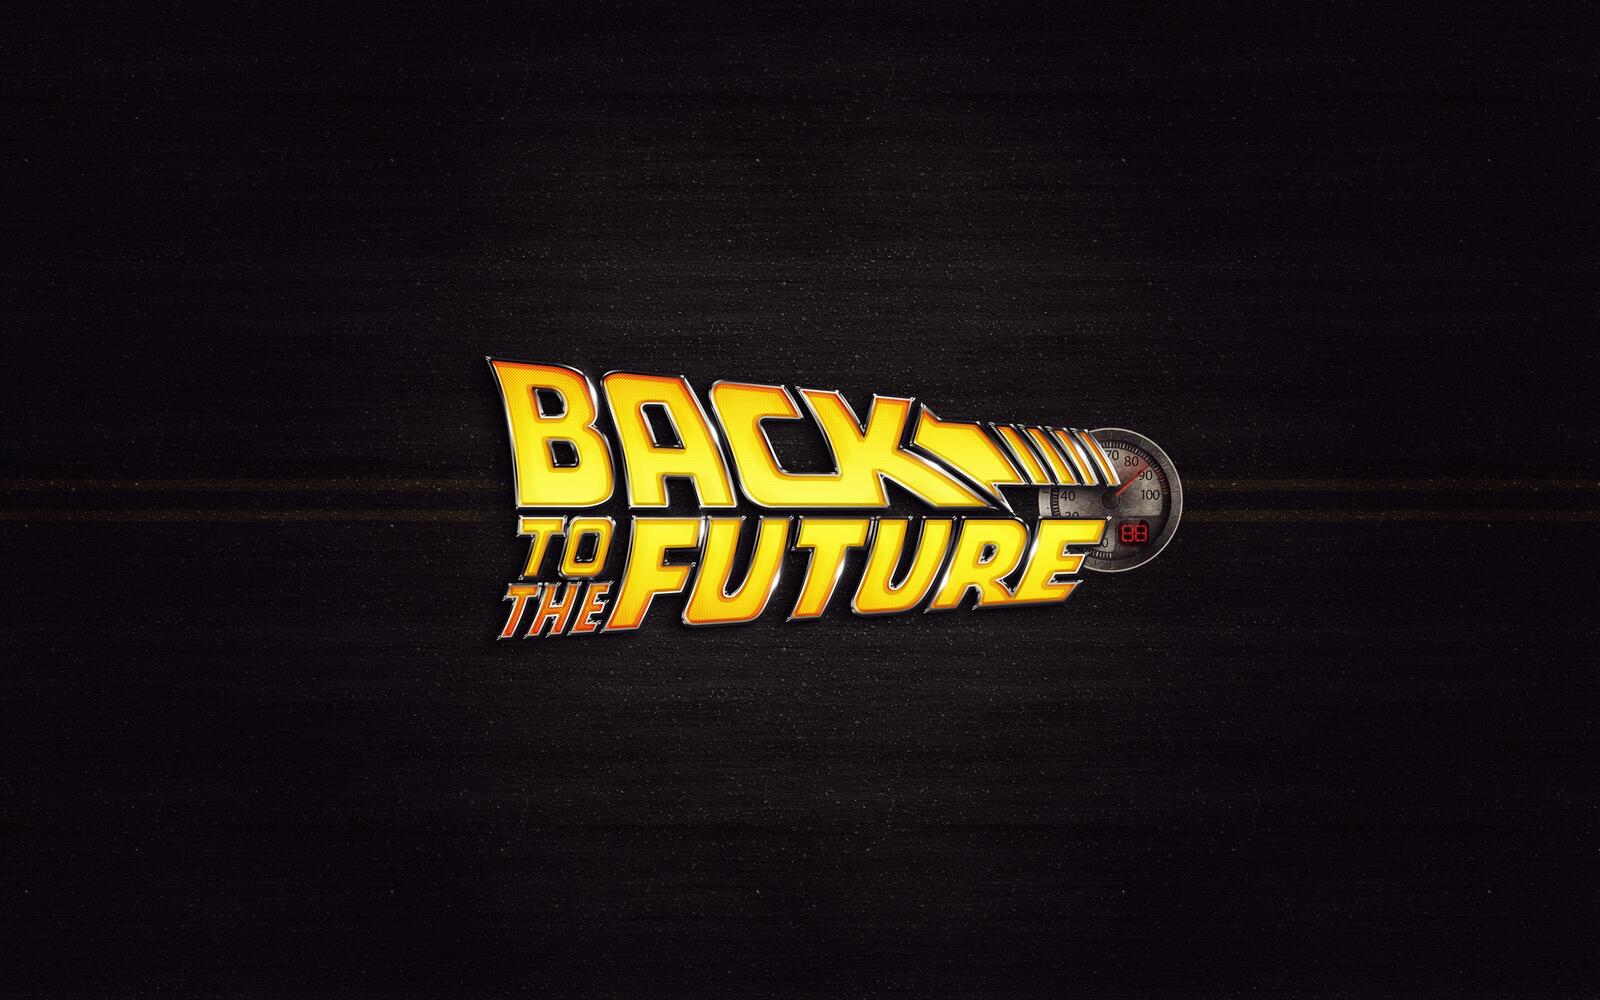 Wallpapers back to the future saver background on the desktop